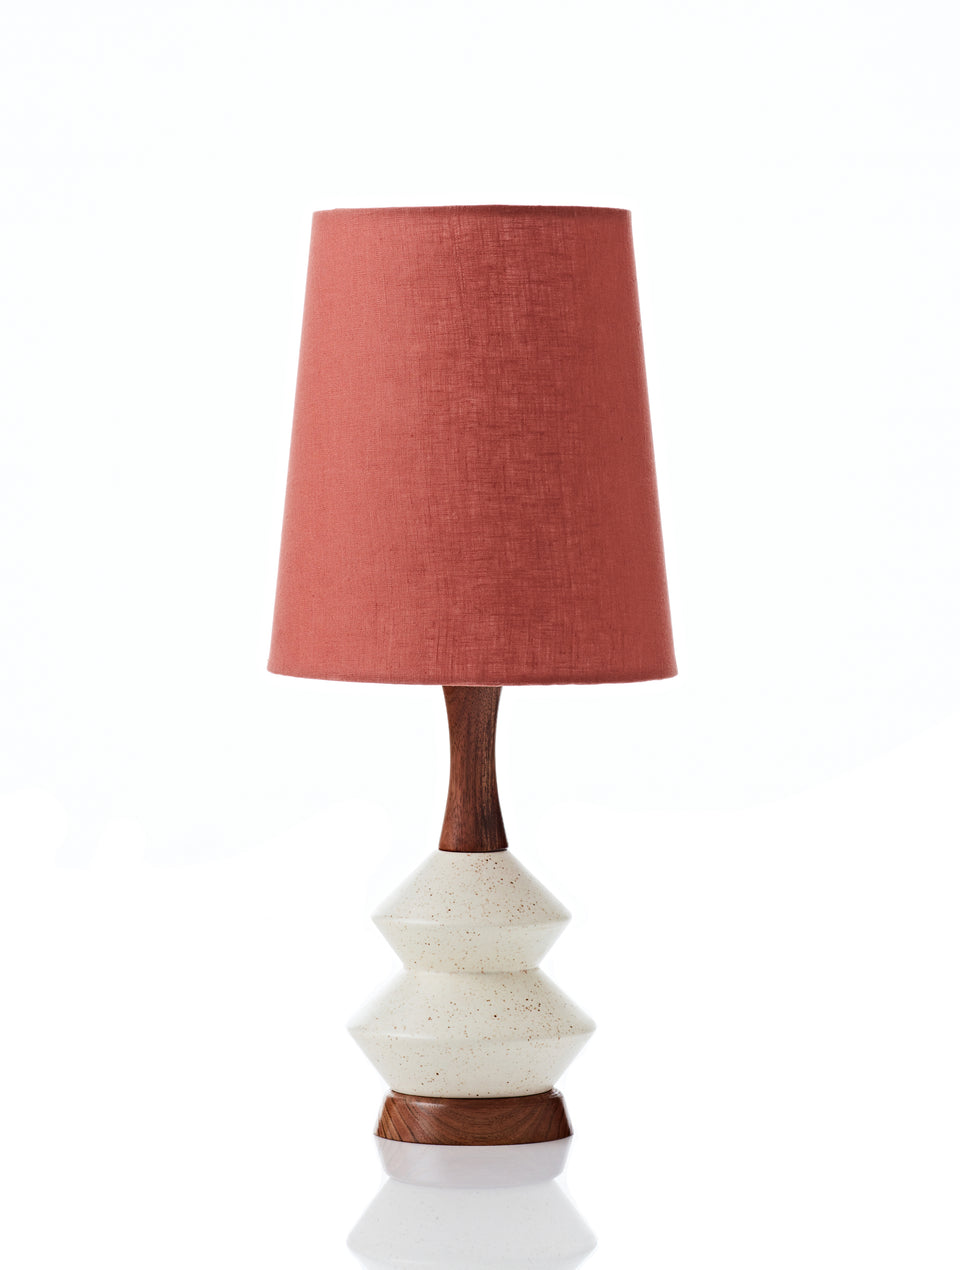 Athena Small Lamp in Red Clay with White Speckled Base by Retro Print Revival